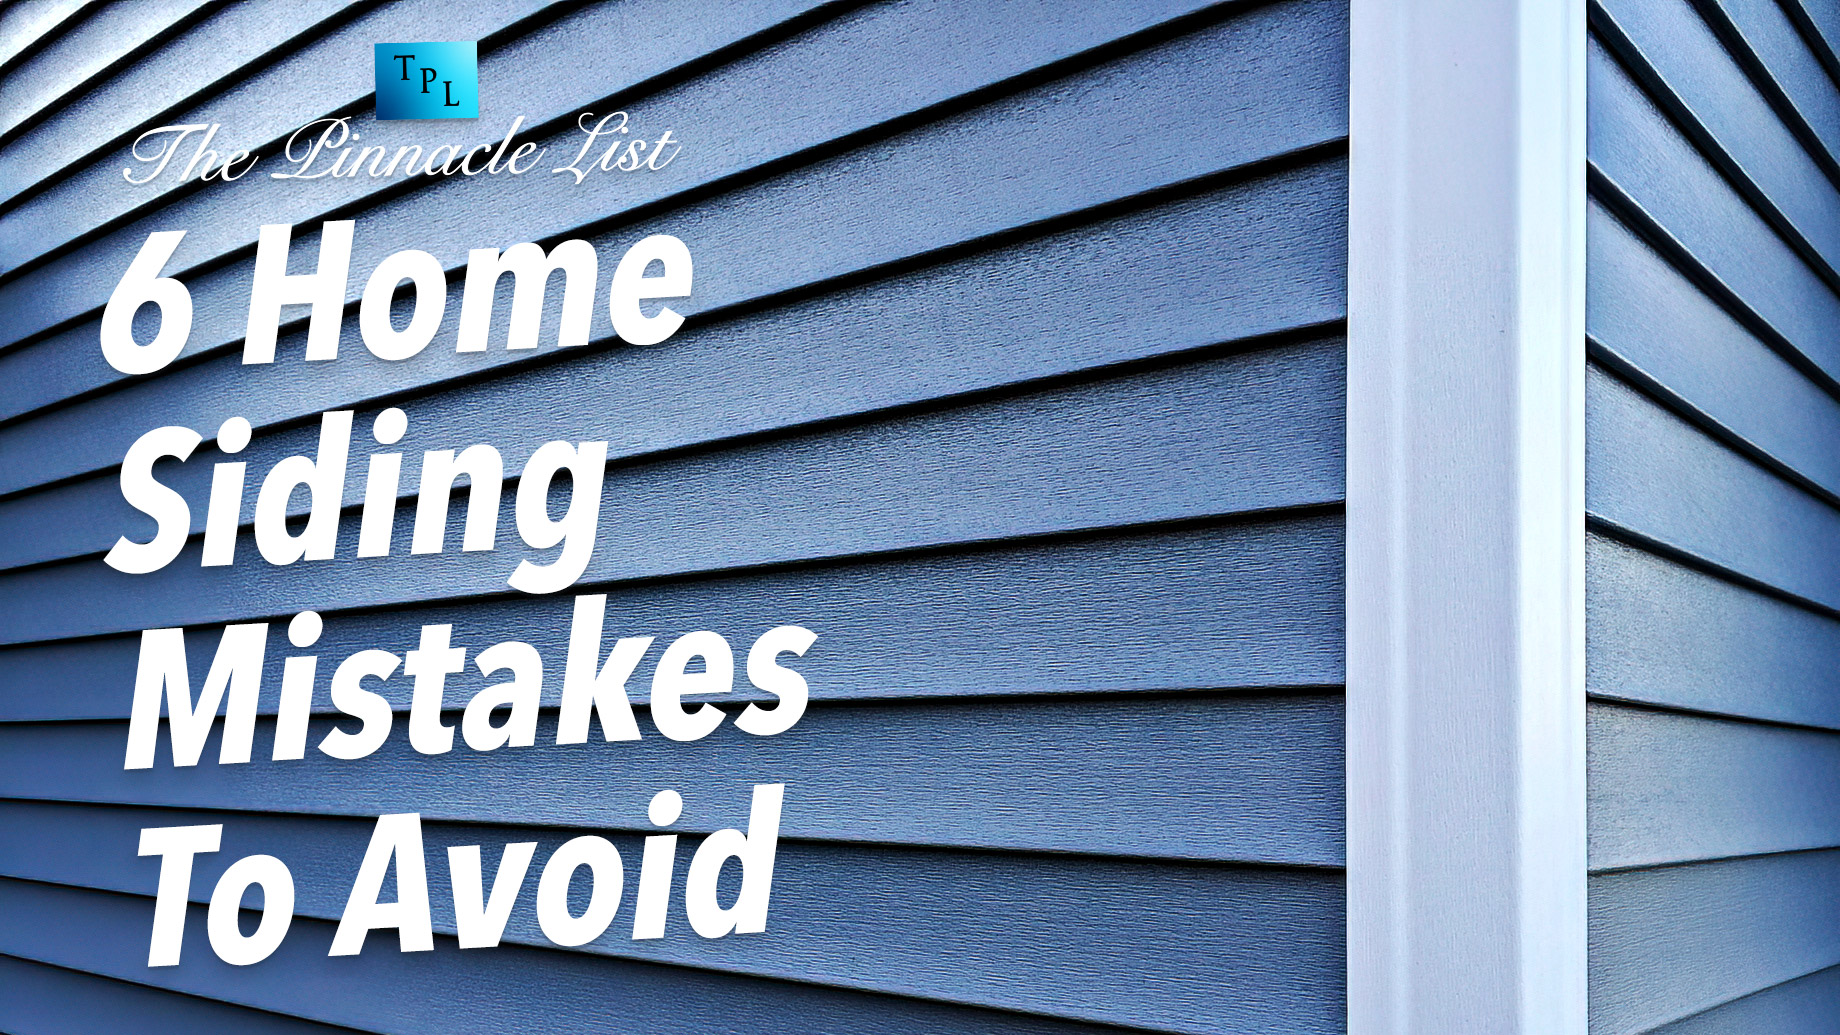 6 Home Siding Mistakes To Avoid